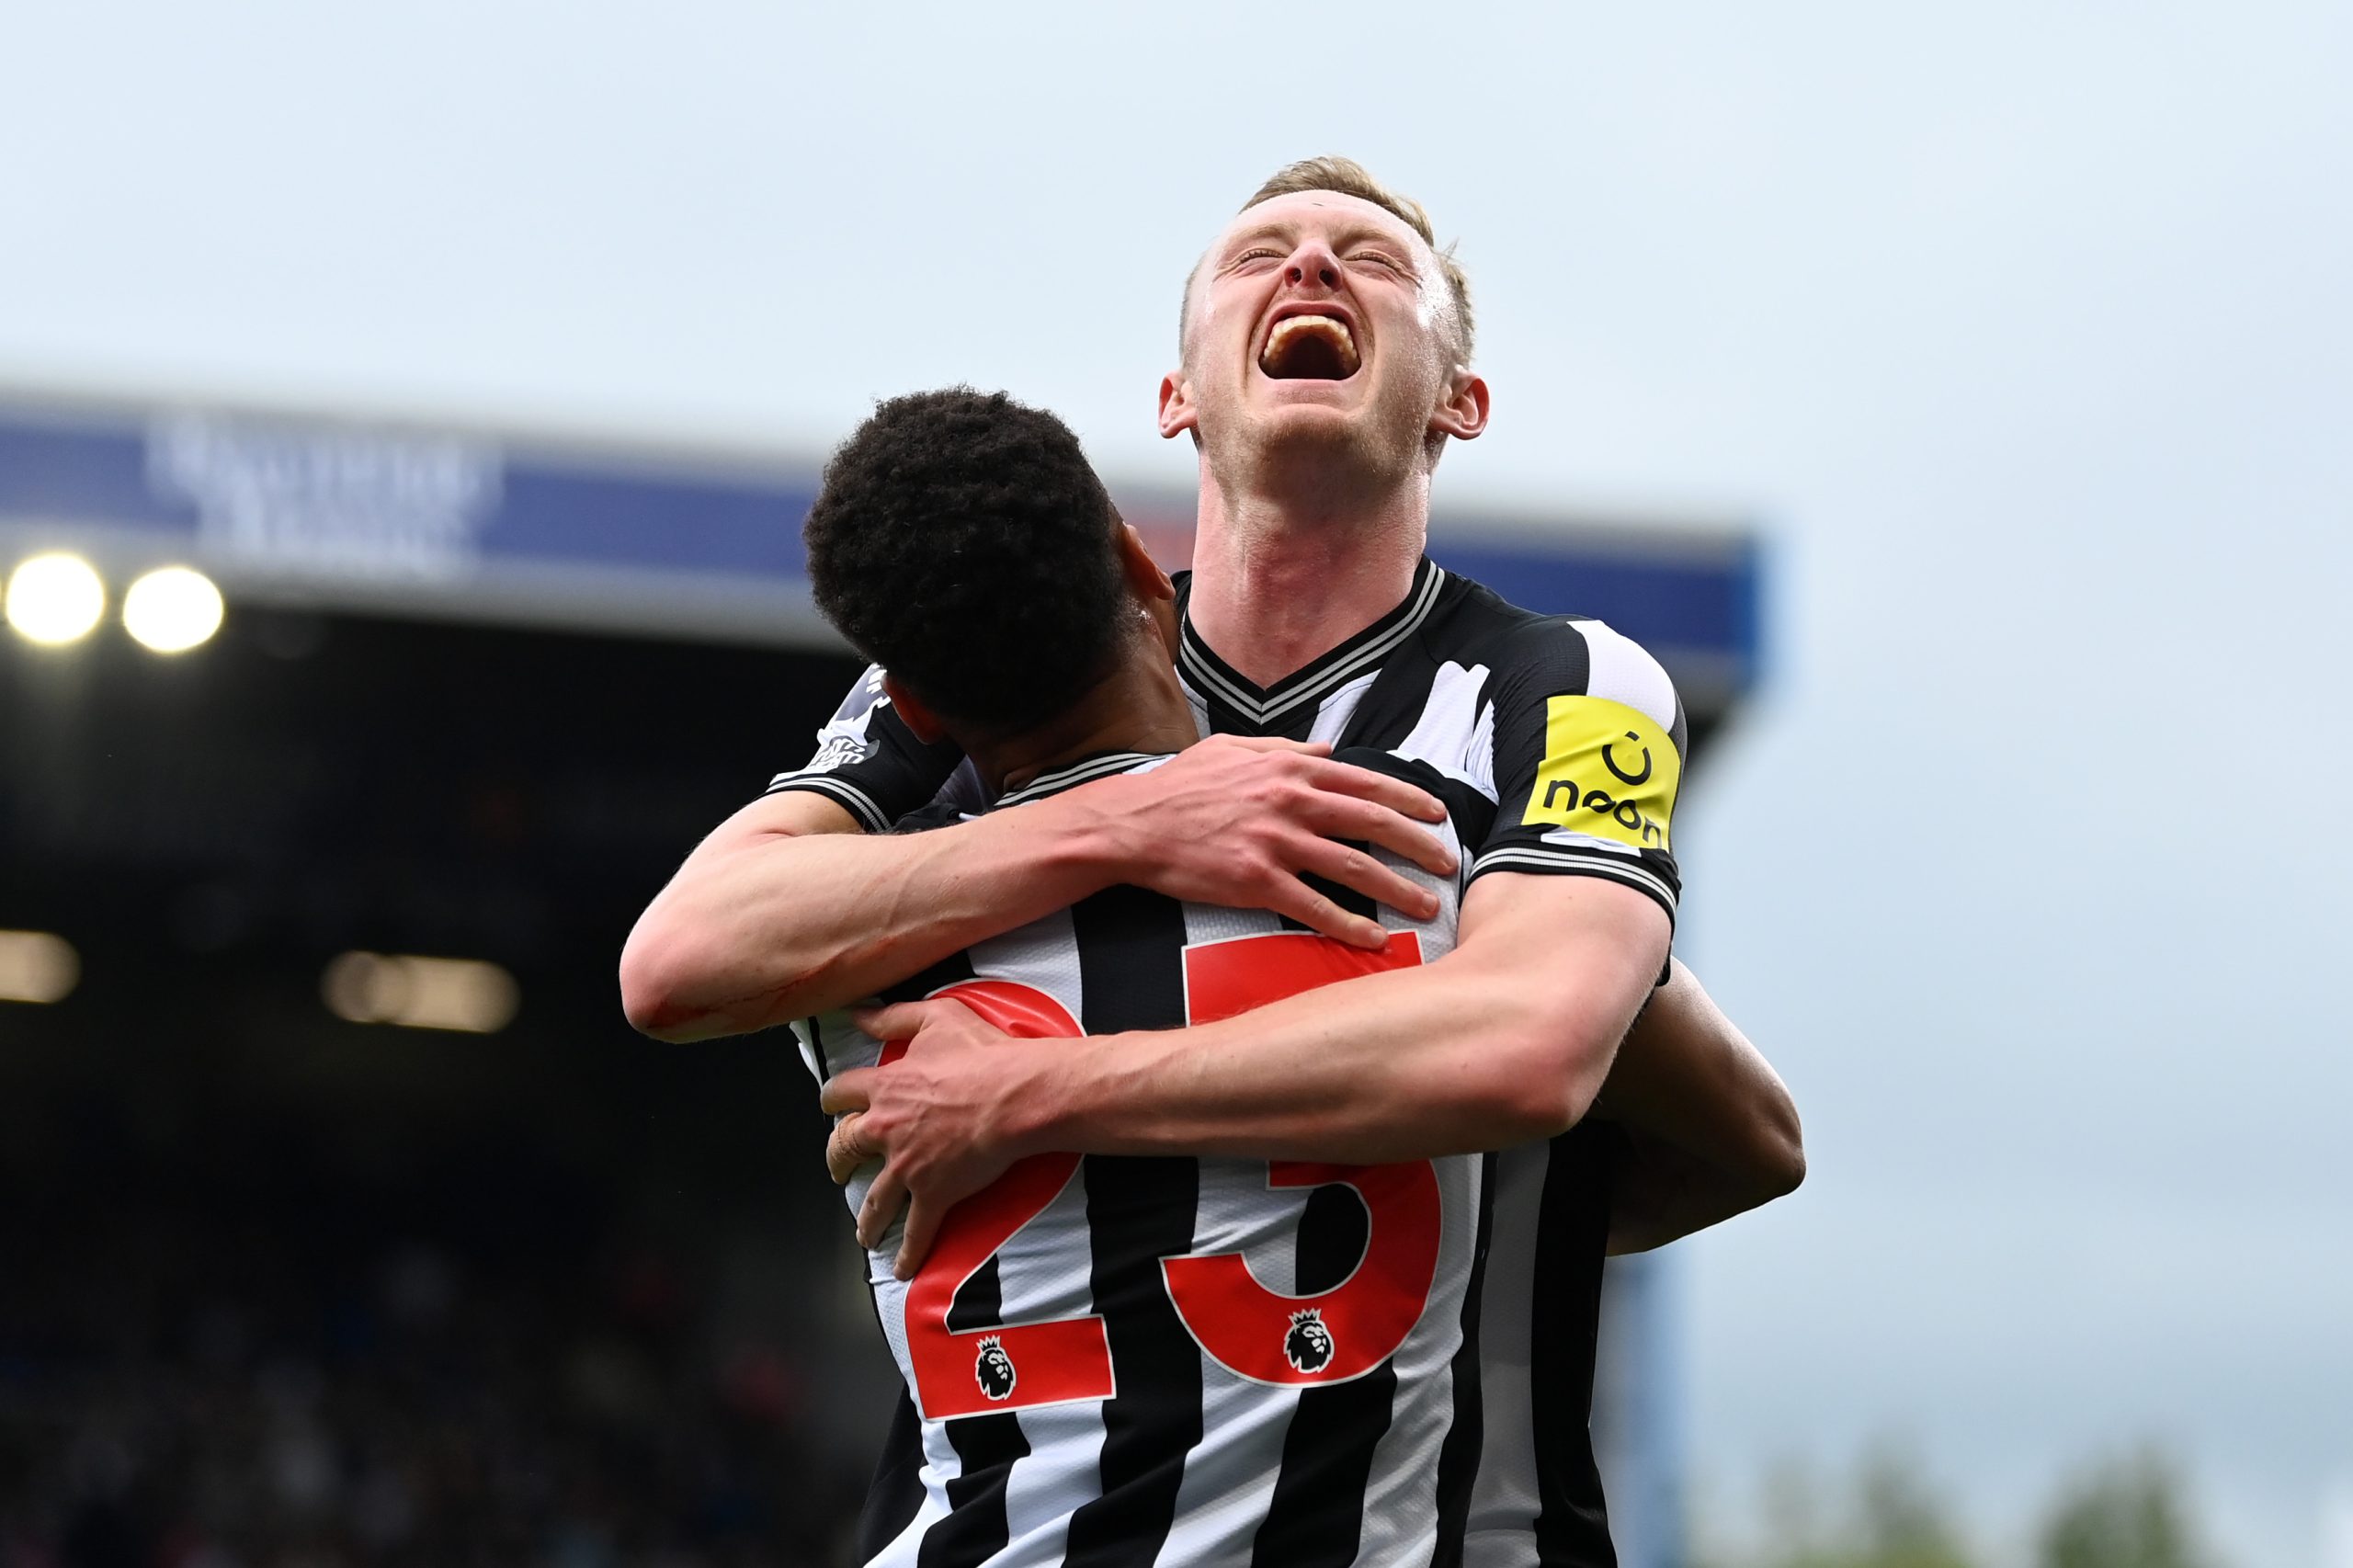 Longstaff scored Newcastle’s second after being teed up by Murphy